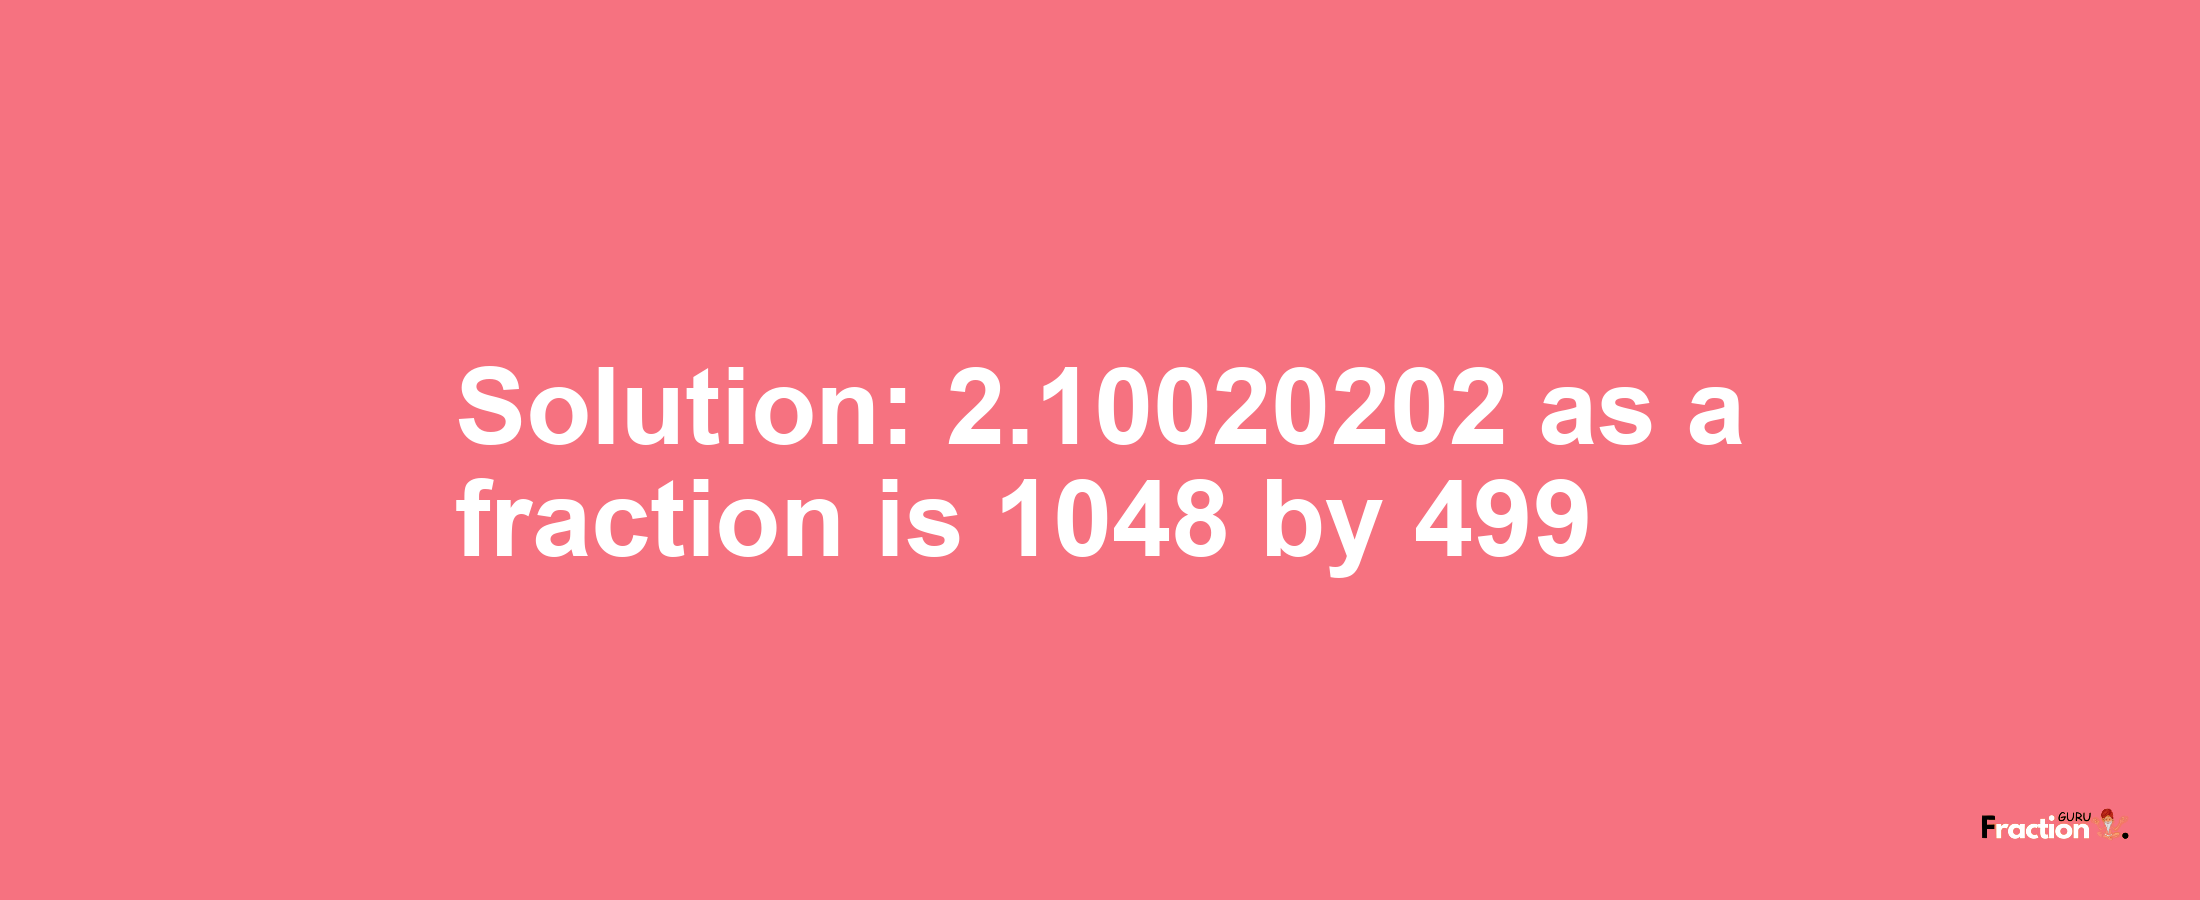 Solution:2.10020202 as a fraction is 1048/499